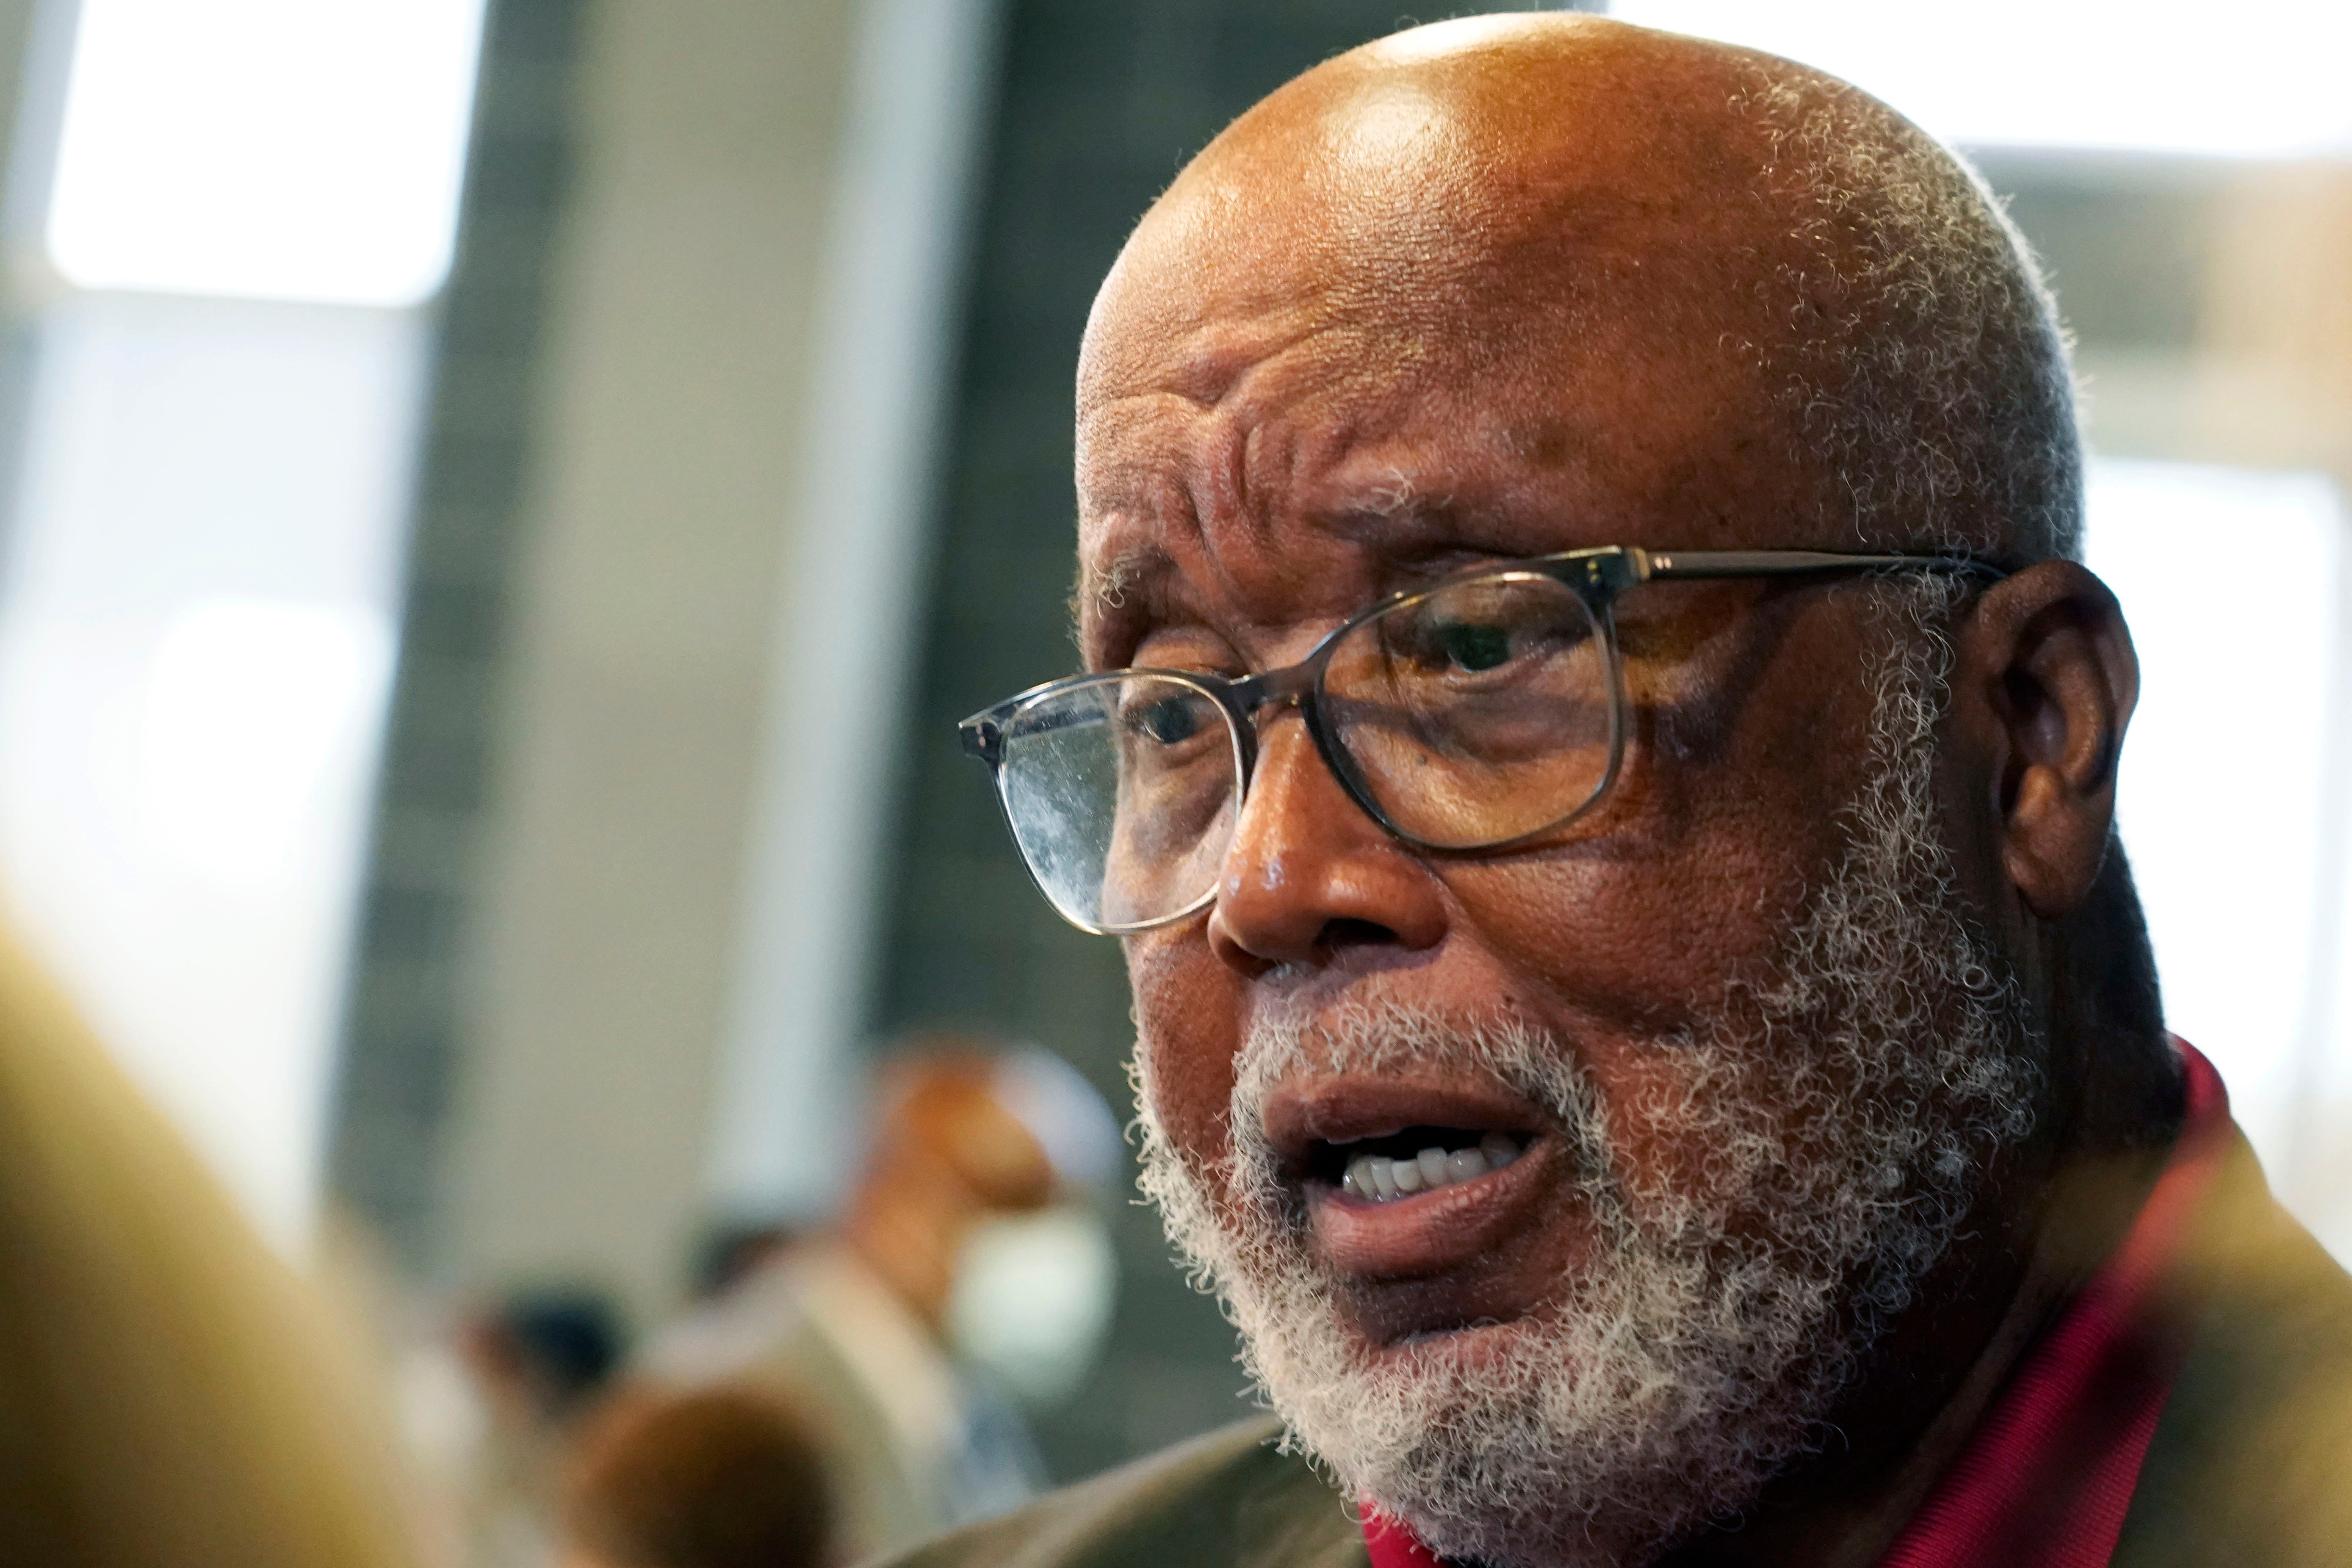 Capitol Police investigating 'suspicious substance' found in Rep. Bennie Thompson's office